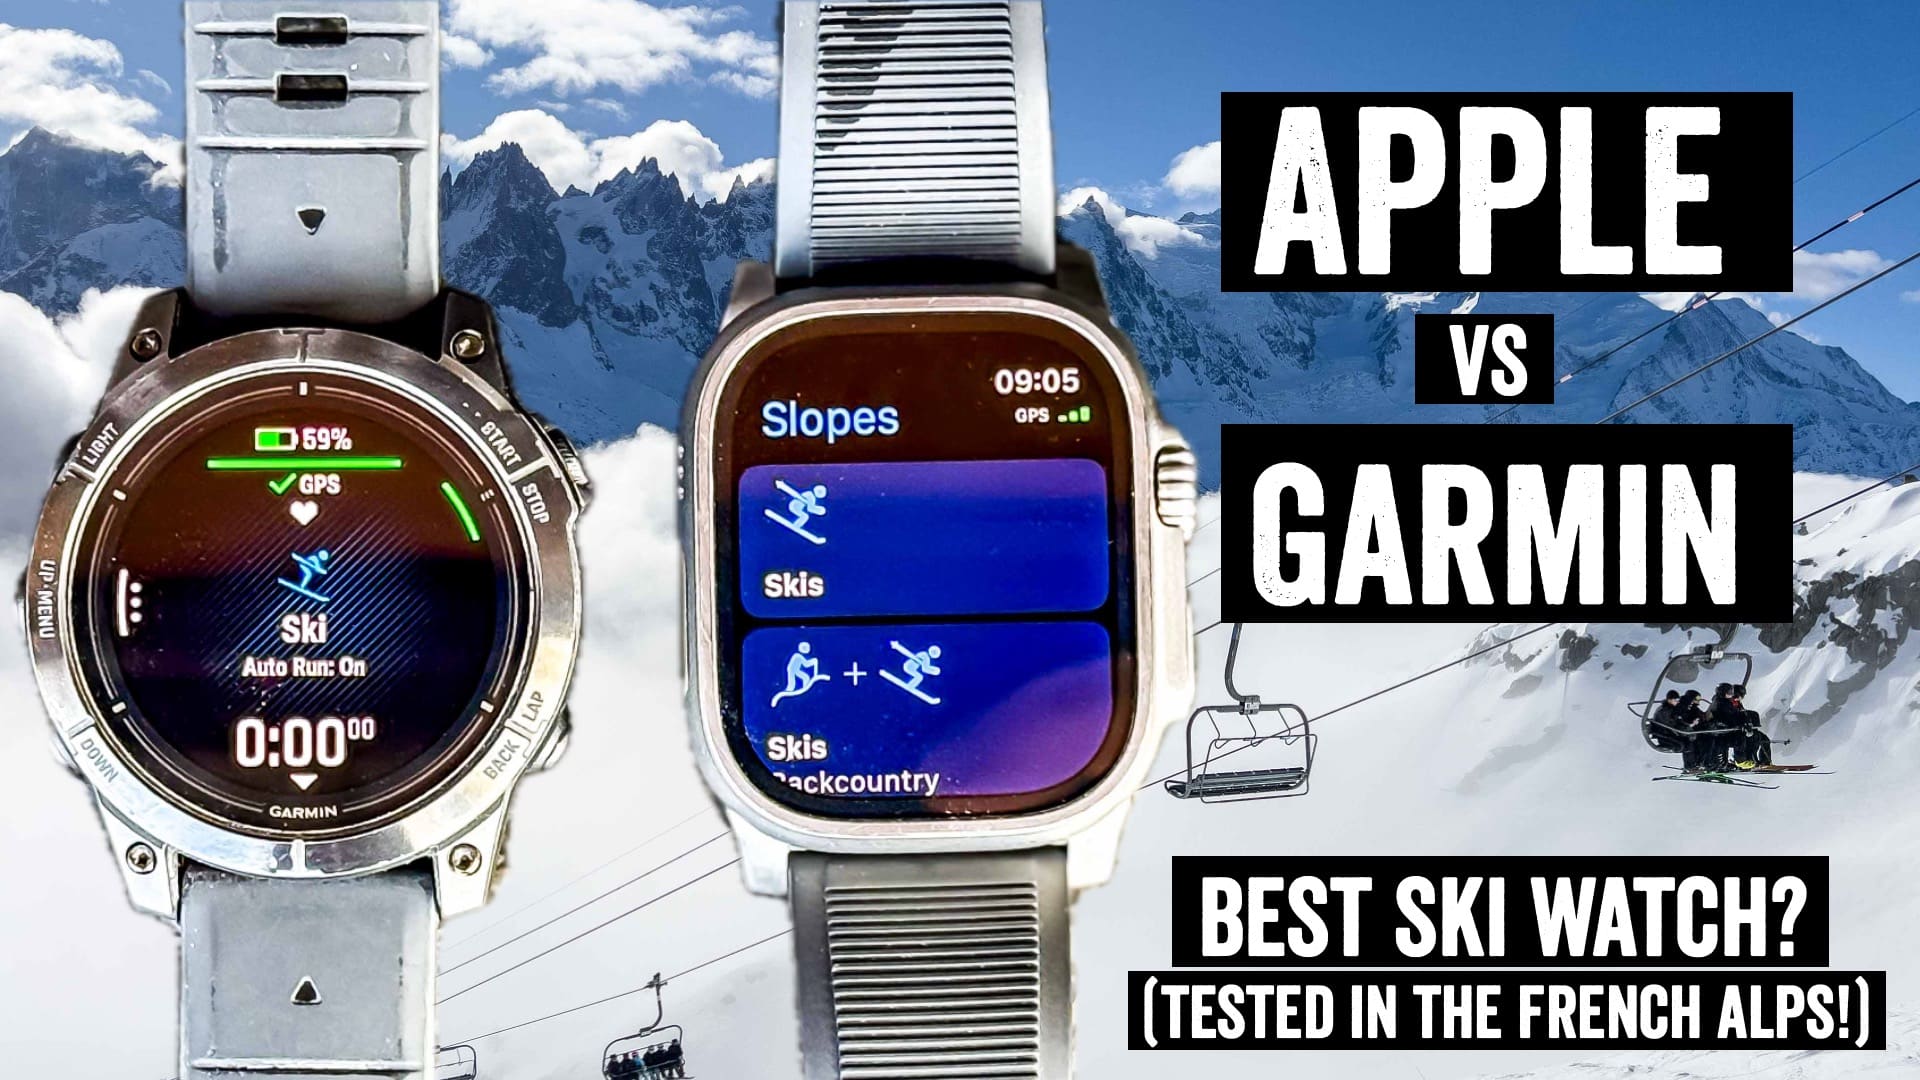 Apple Watch vs Garmin Watch: Skiing Features Tested!